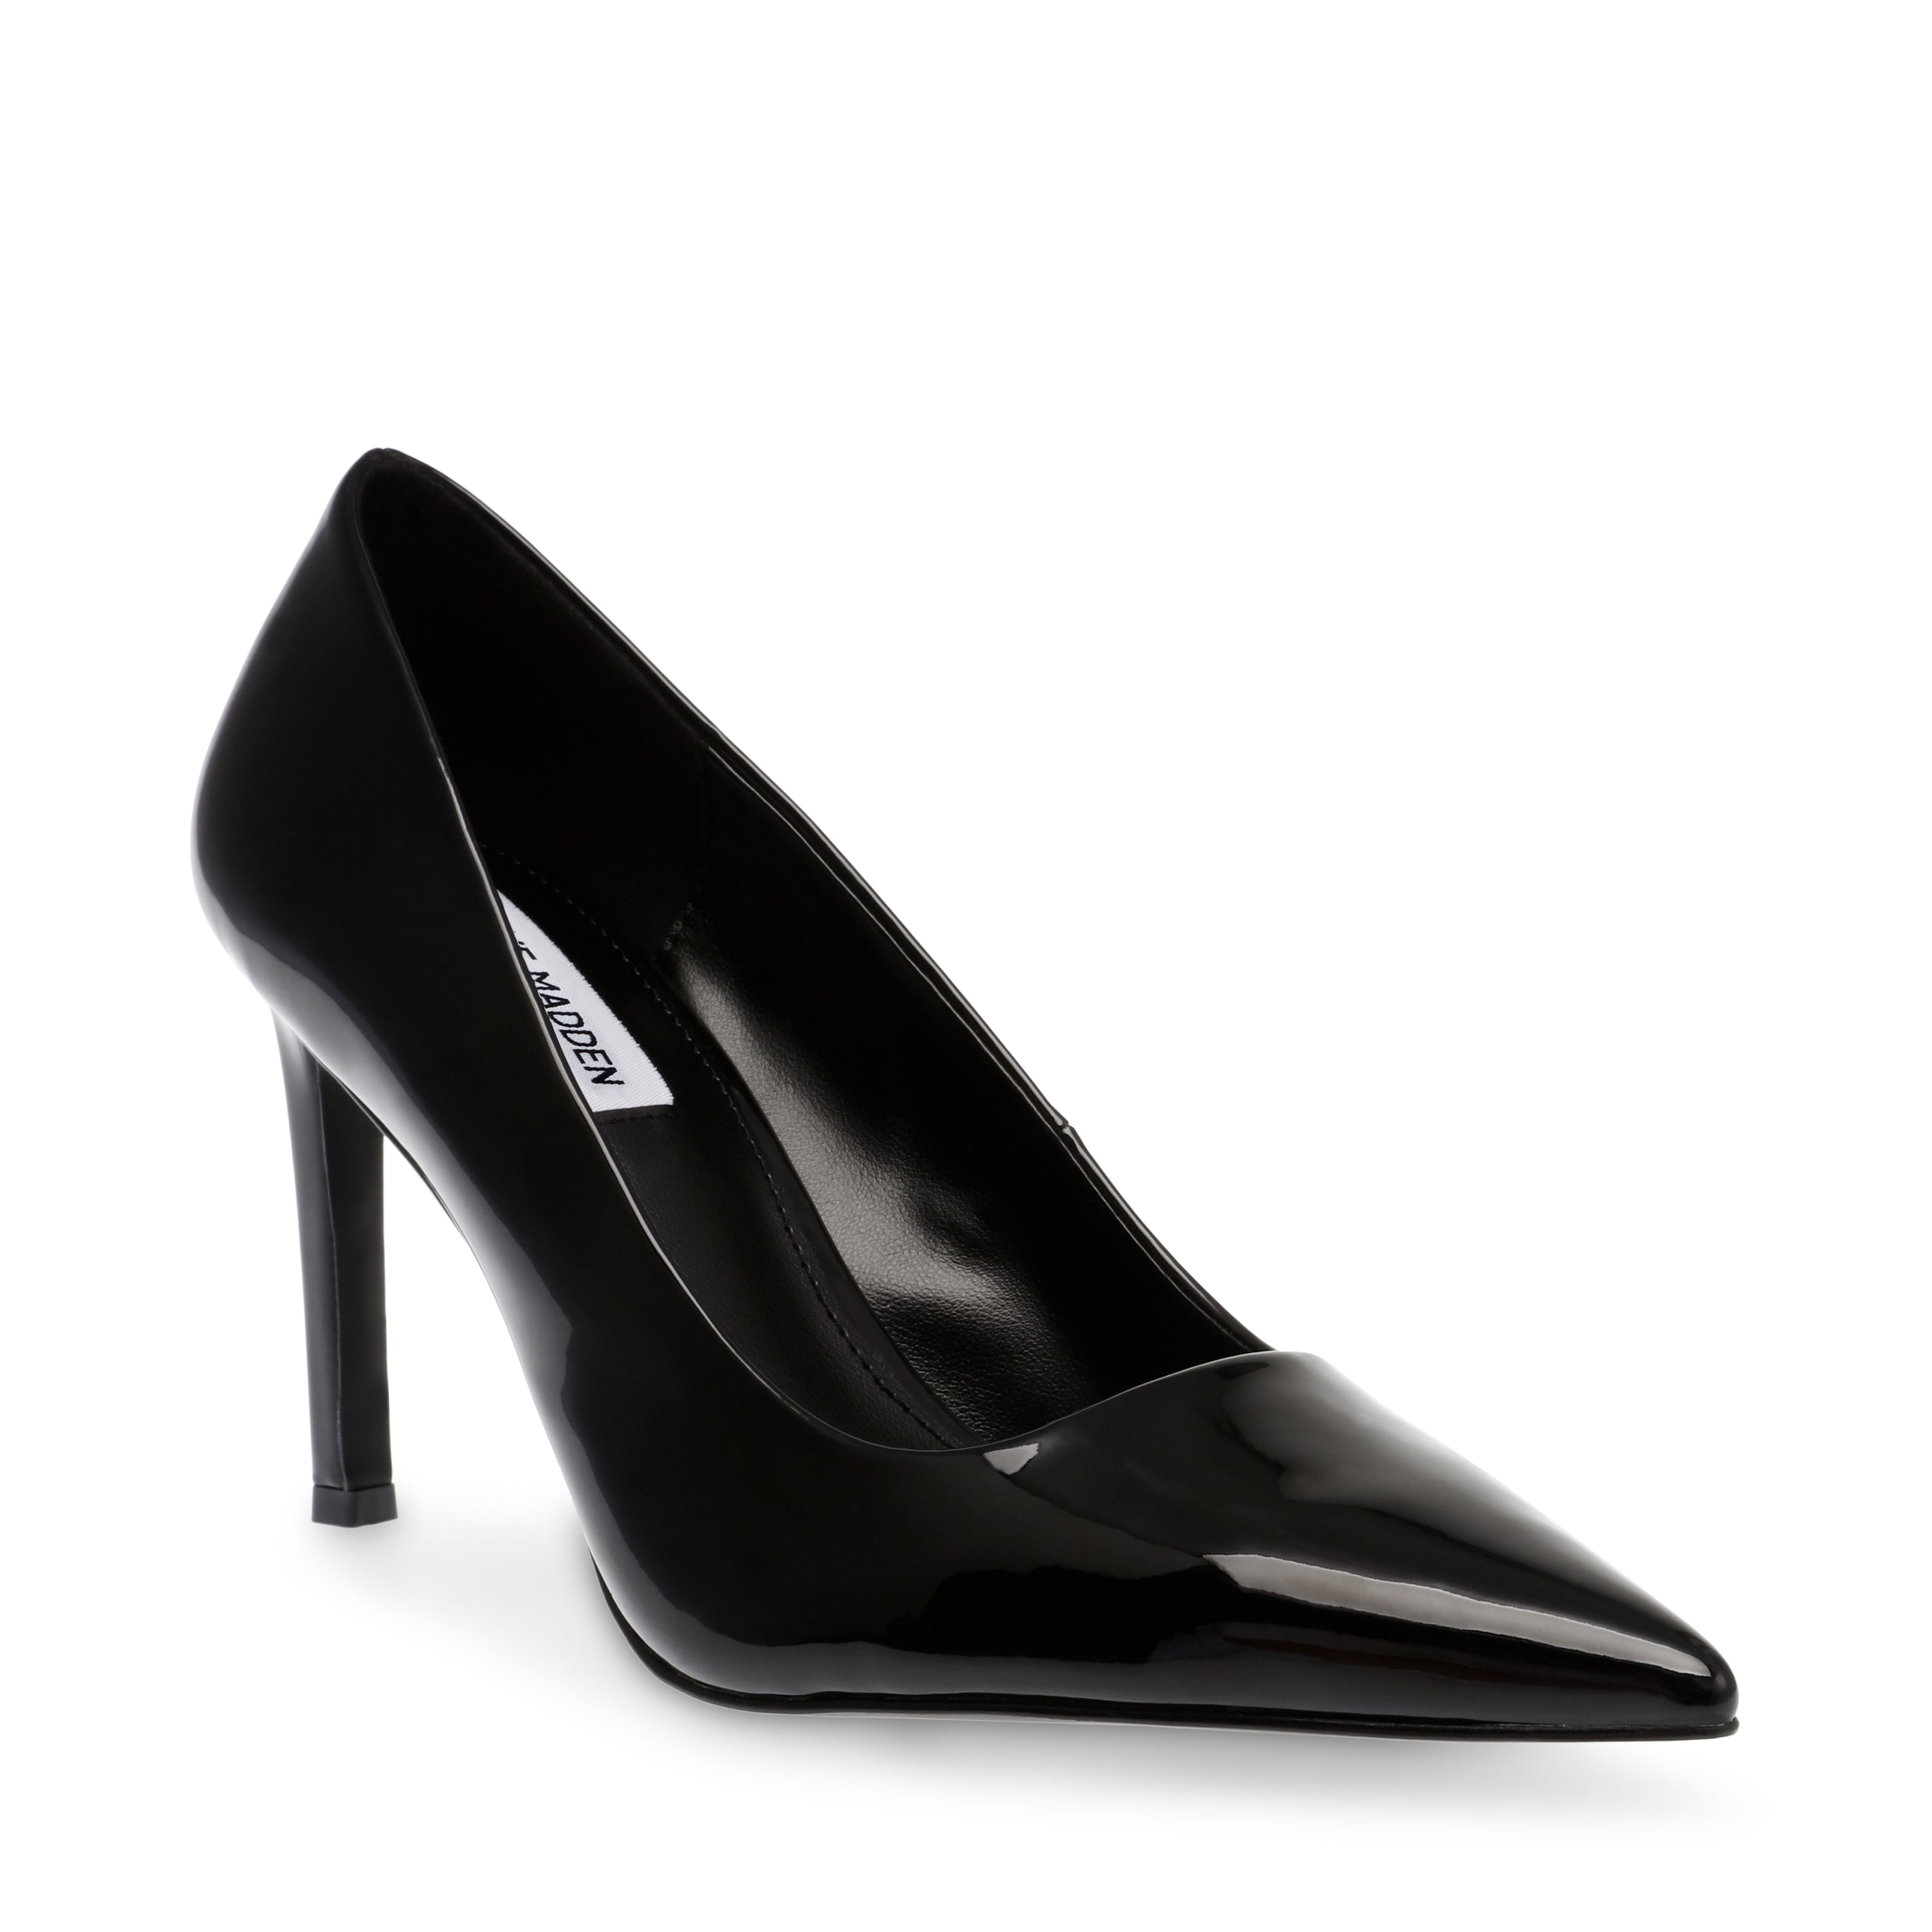 PROPHECY BLACK PATENT HEELS- Hover Image